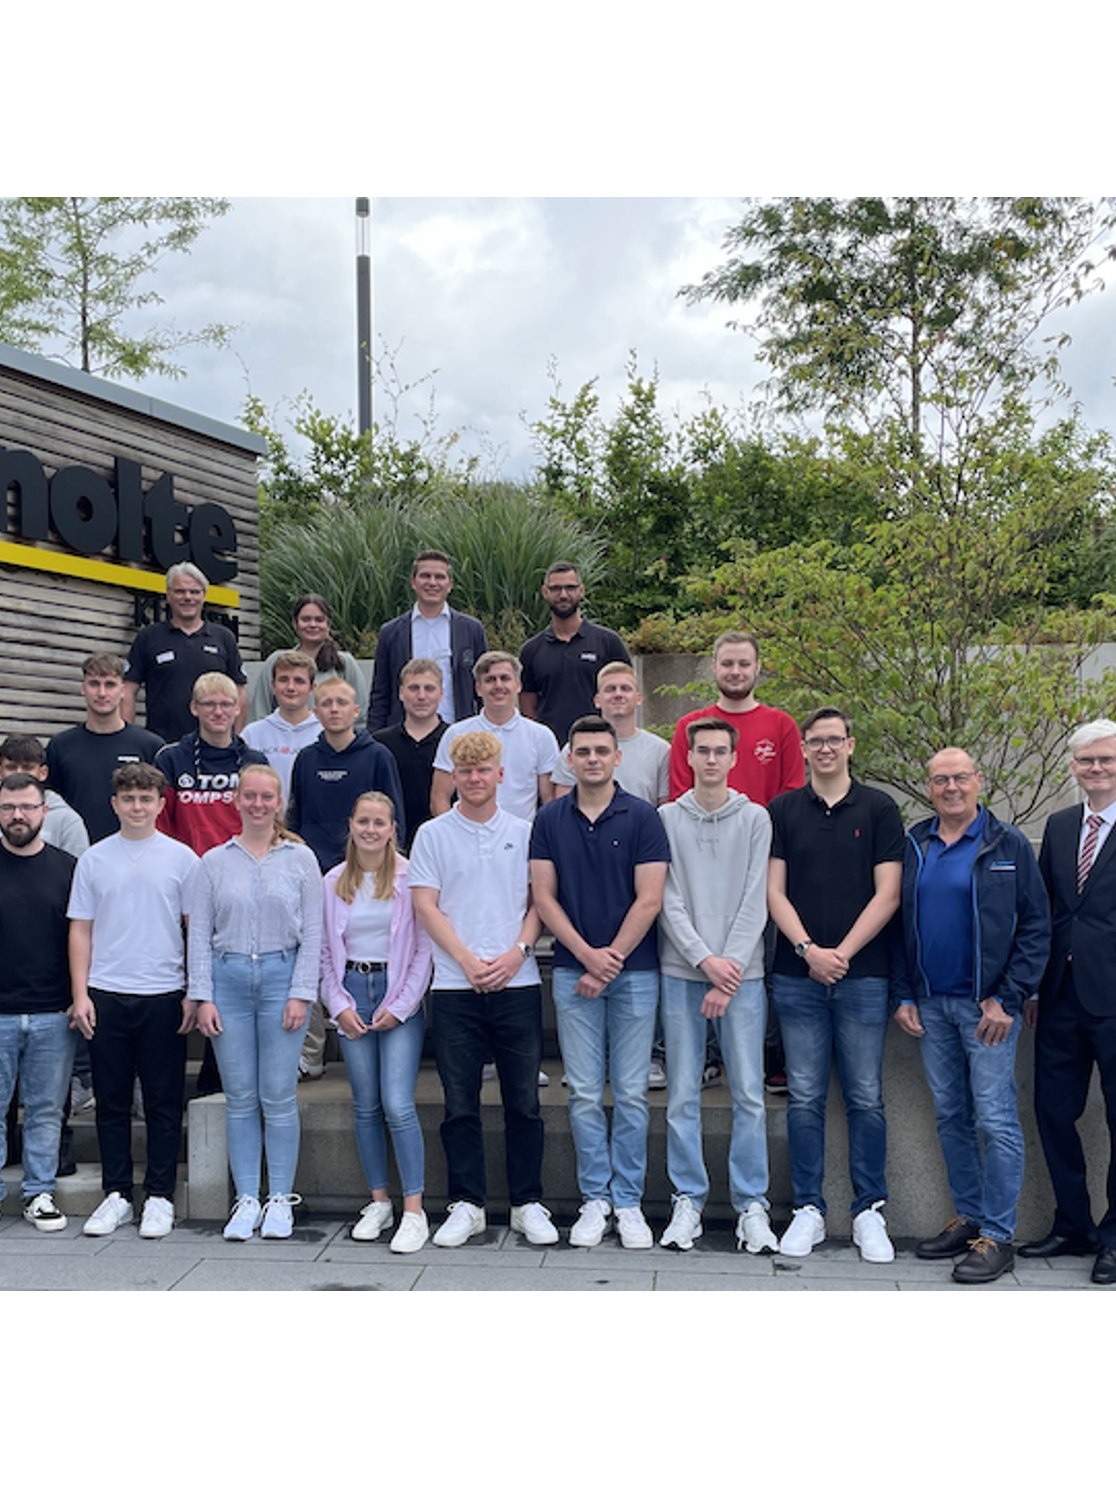 Nolte Kitchens is pleased to welcome 18 young talents starting their professional lives in various fields today. The family-owned company, based in Löhne since 1958, offers five apprenticeship positions as well as two practice-integrated degree programs to ensure its future readiness with qualified professionals.